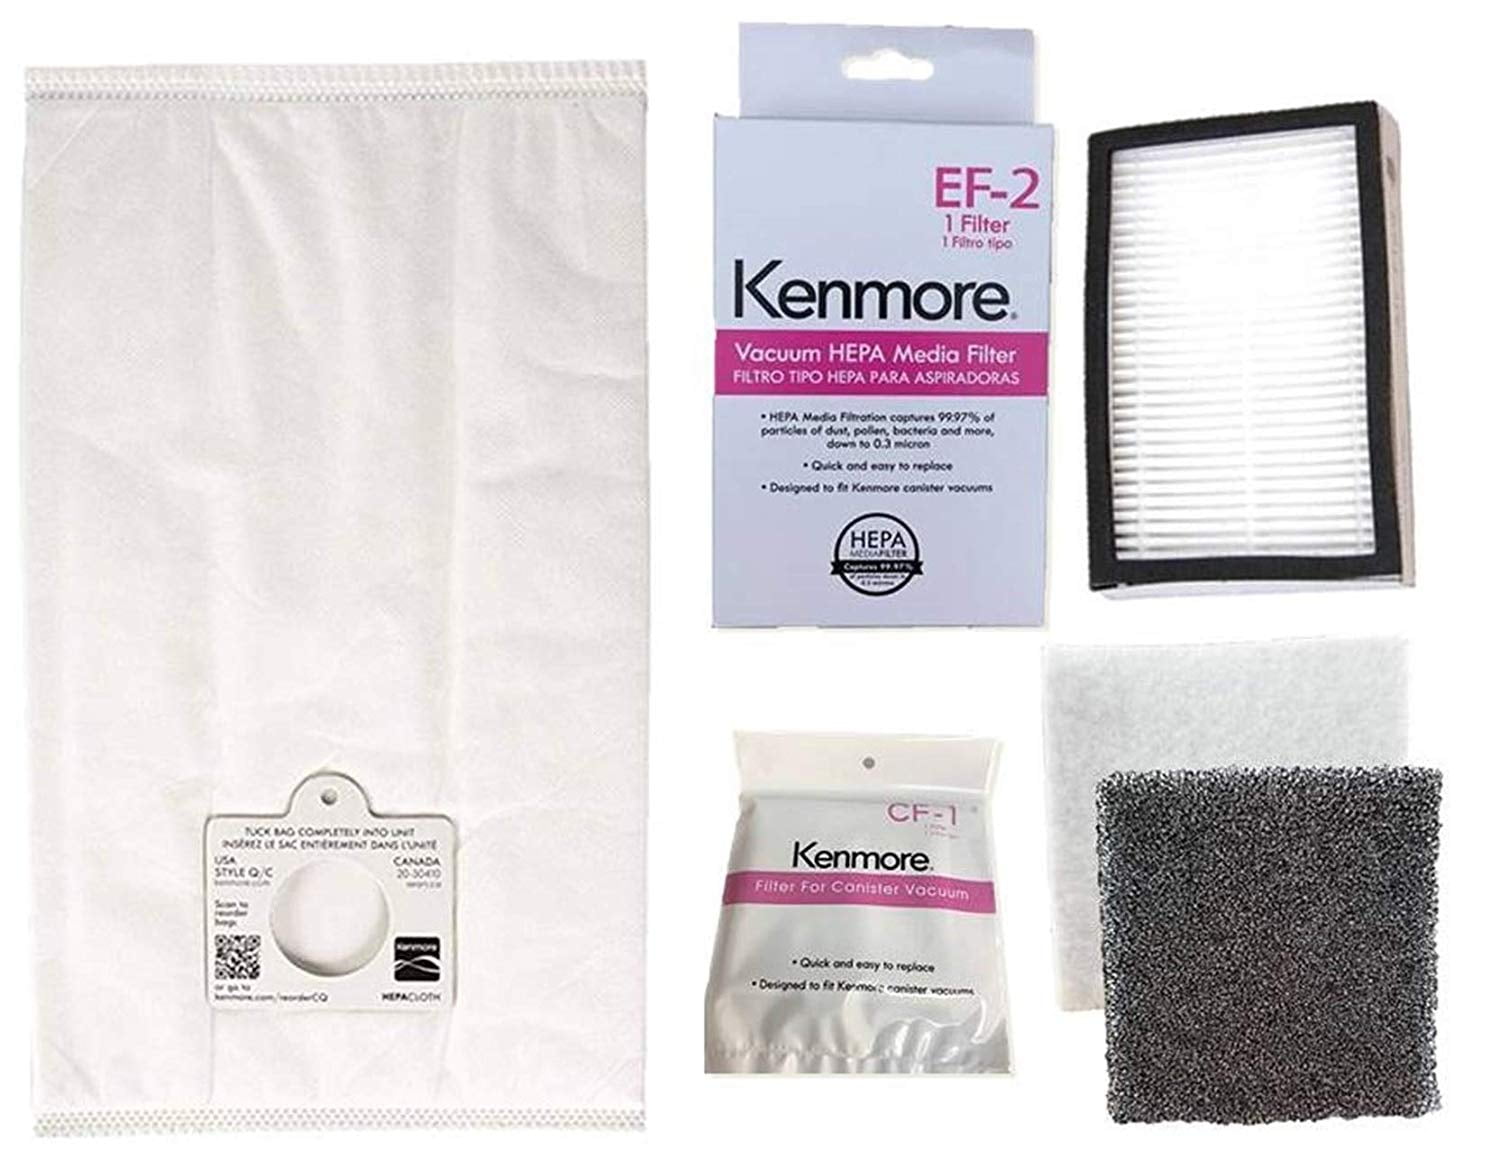 Kenmore 53291 Style Q HEPA Cloth Vacuum Bags for Kenmore Canister Vacuum Cleaners 2 Pack